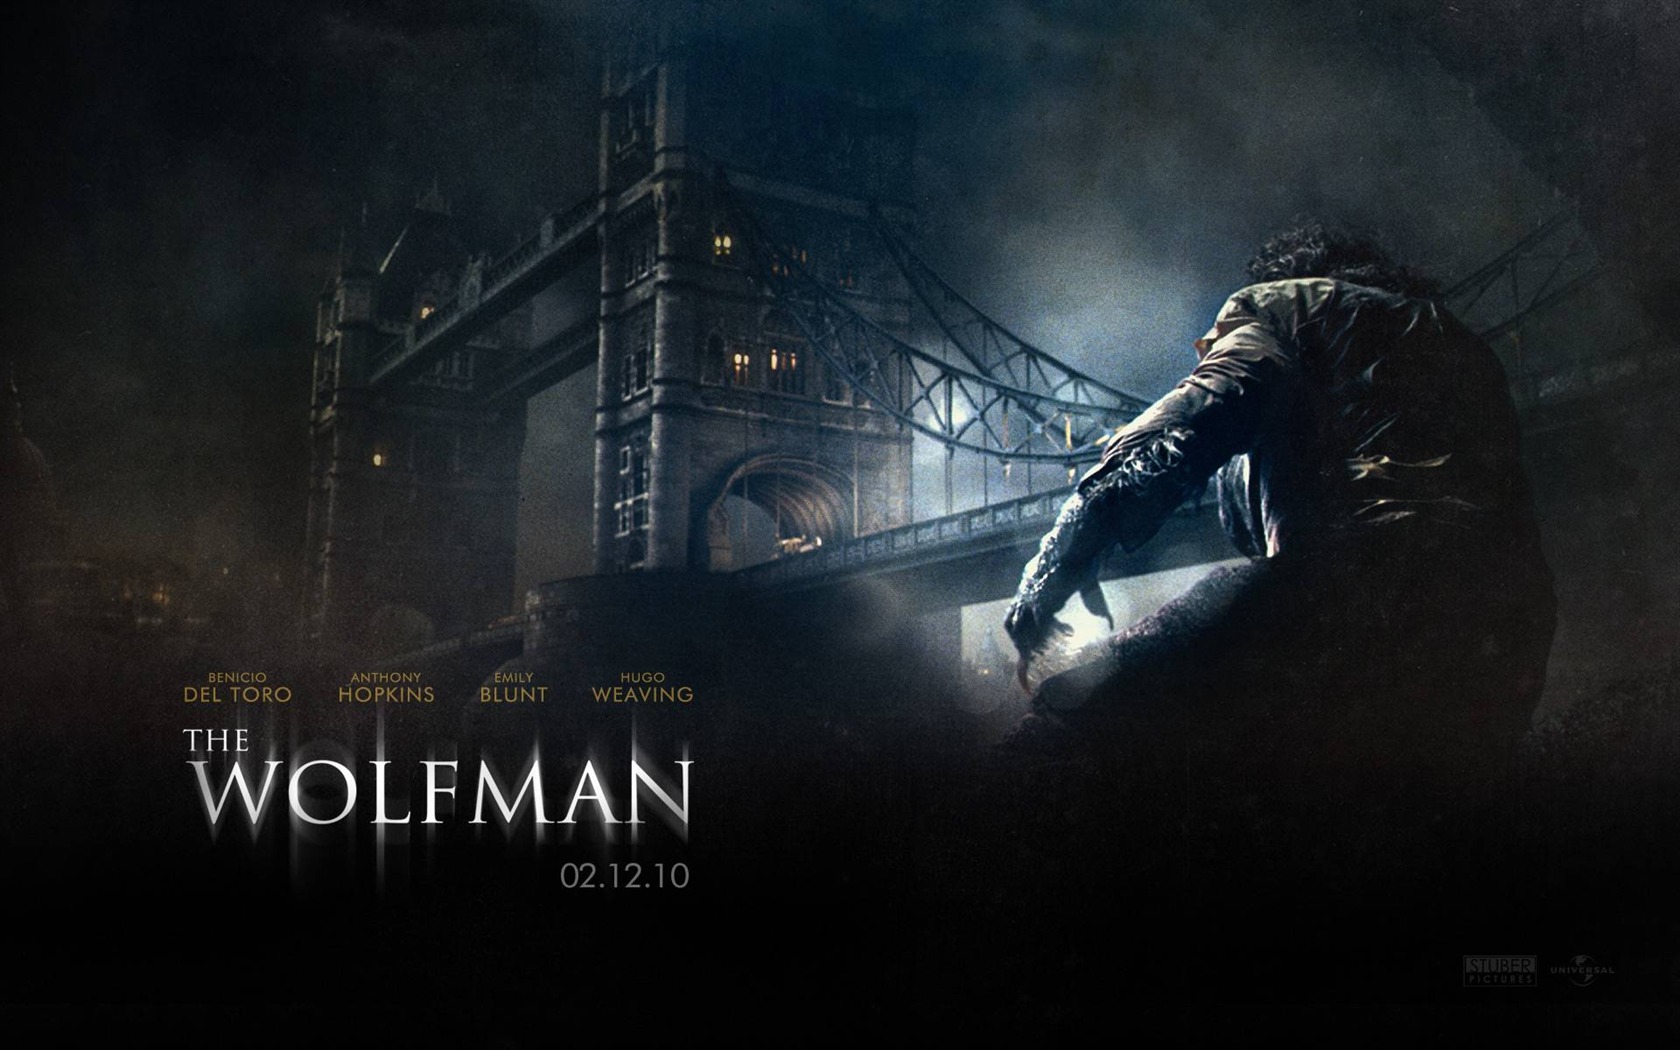 The Wolfman Movie Wallpapers #5 - 1680x1050